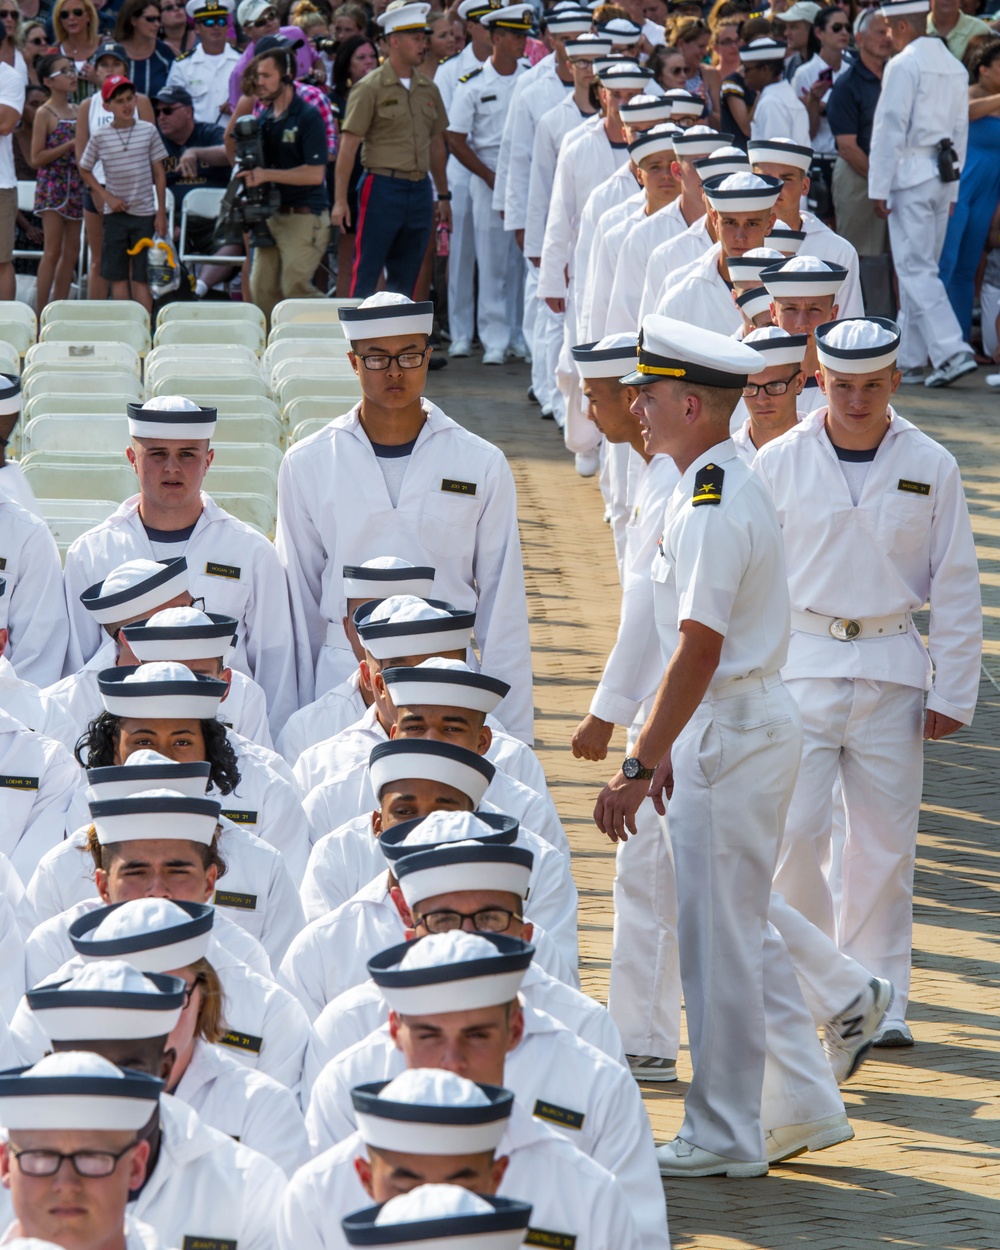 DVIDS Images USNA Induction Day [Image 5 of 7]